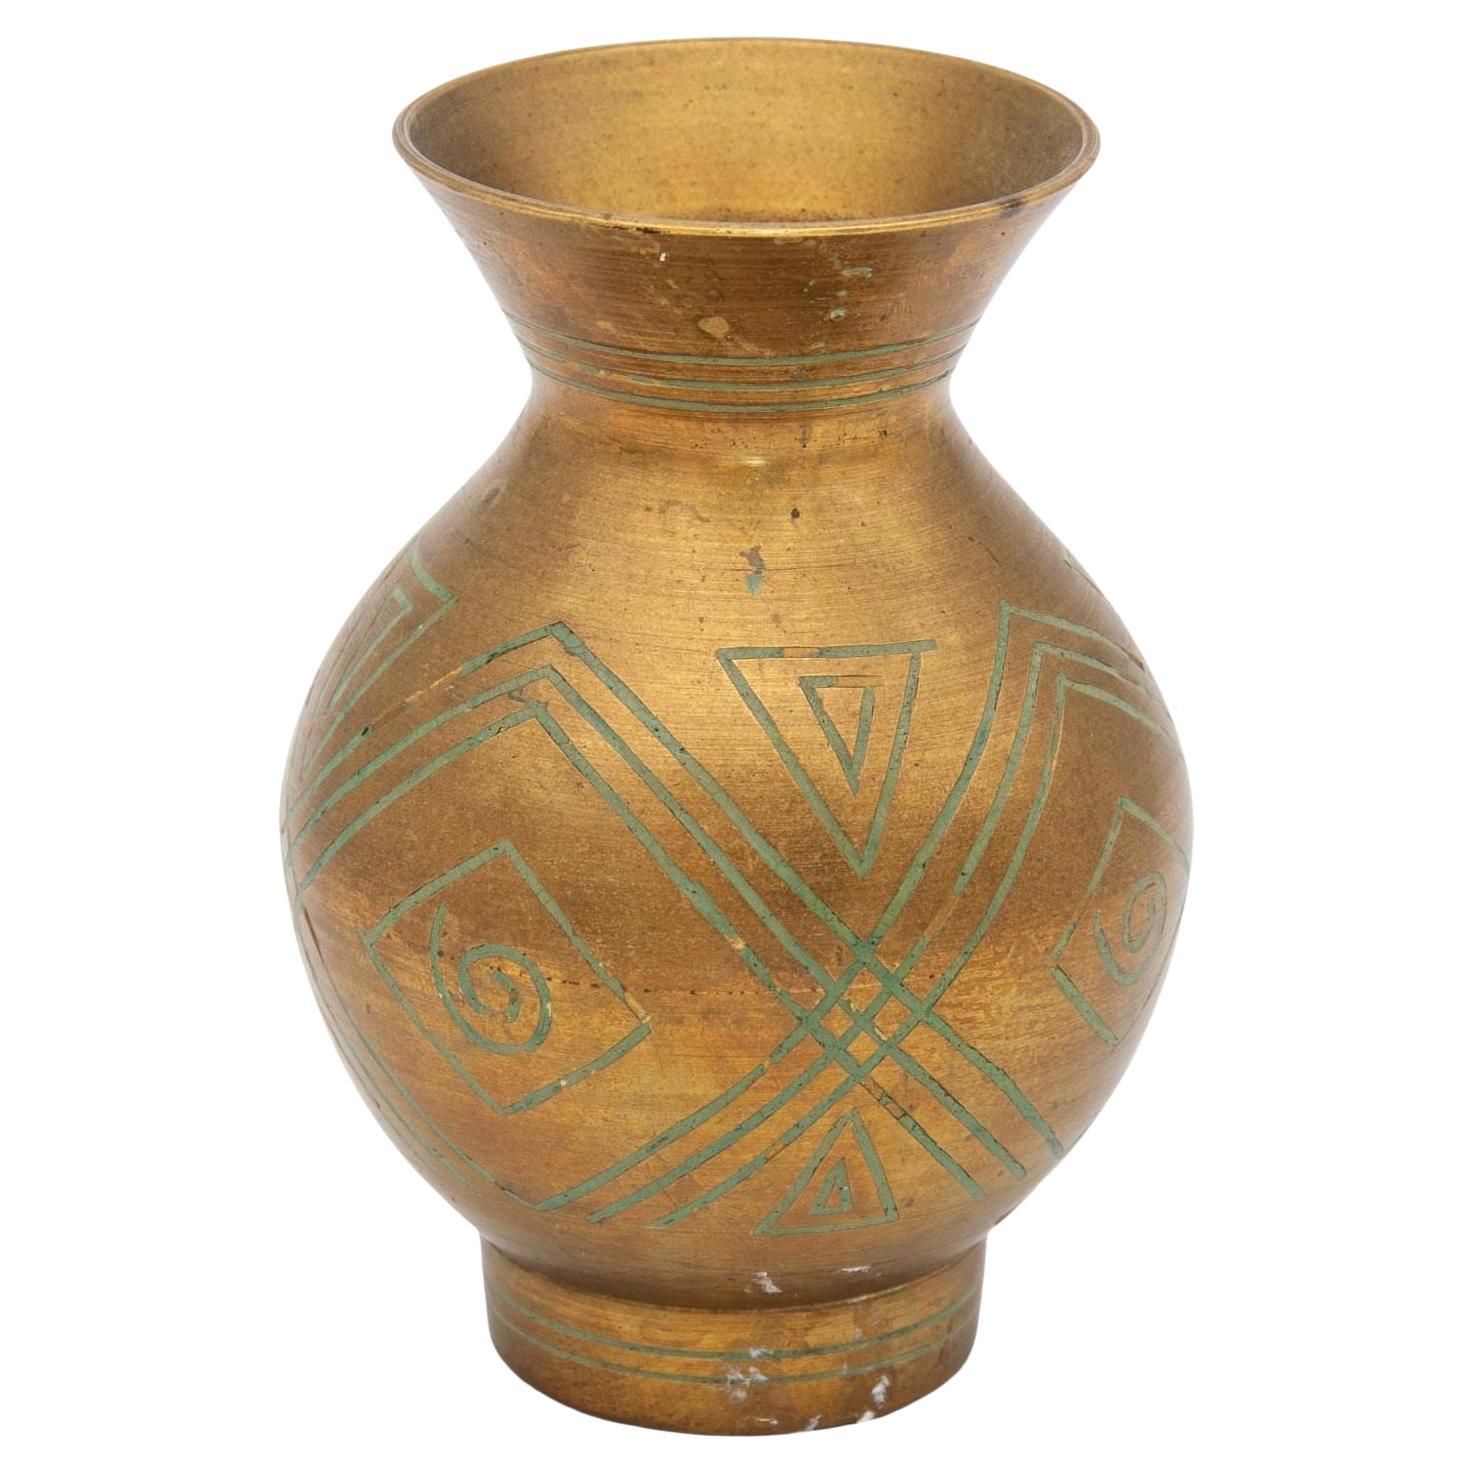 Vintage Small Brass Vase with Geometric Etched Pattern on Surface